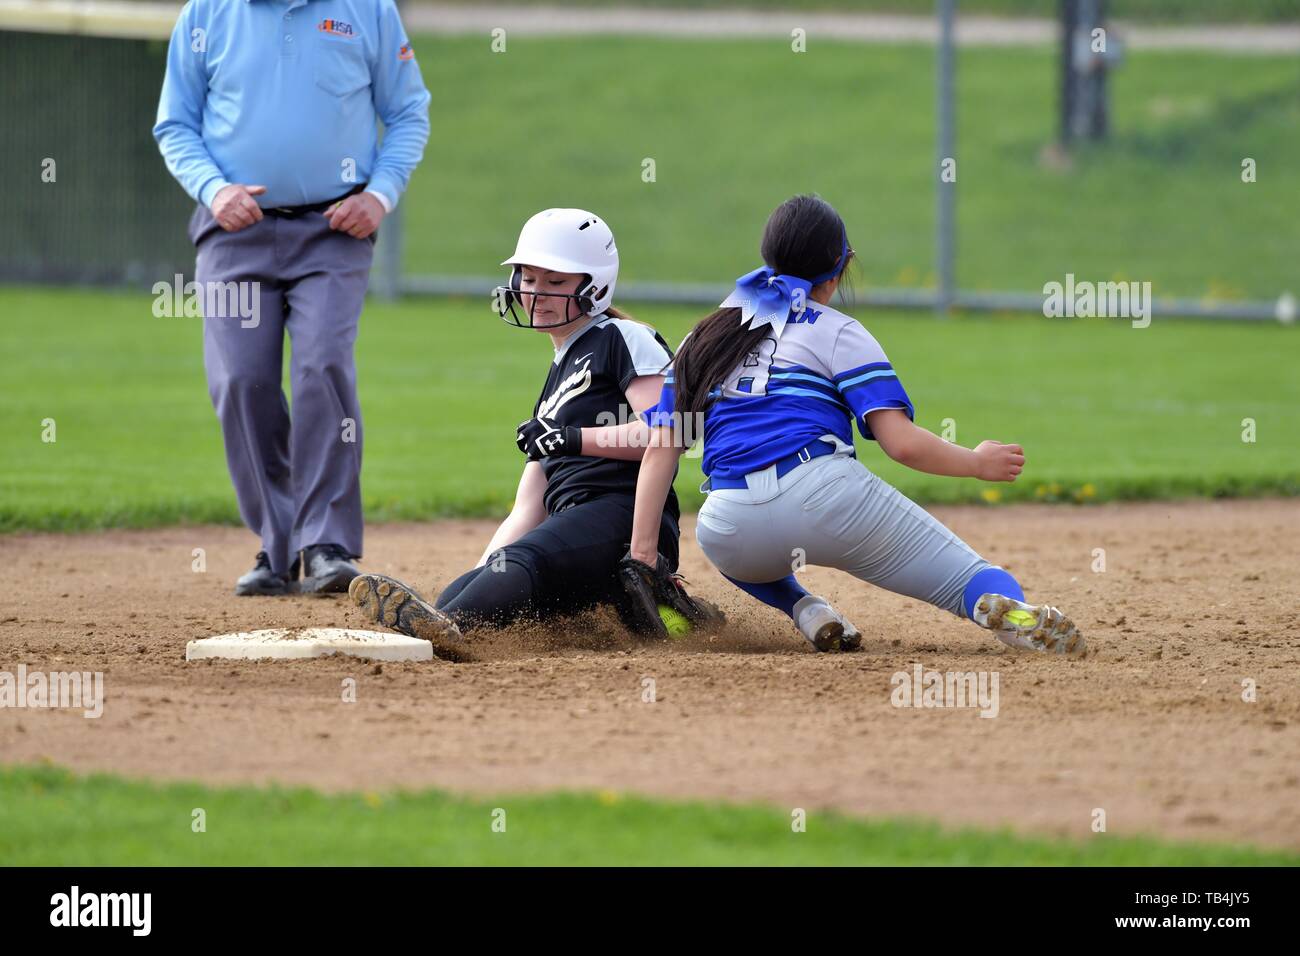 Shortstop tagging an opposing base runner out on an ill-fated steal attempt of second base. USA. Stock Photo